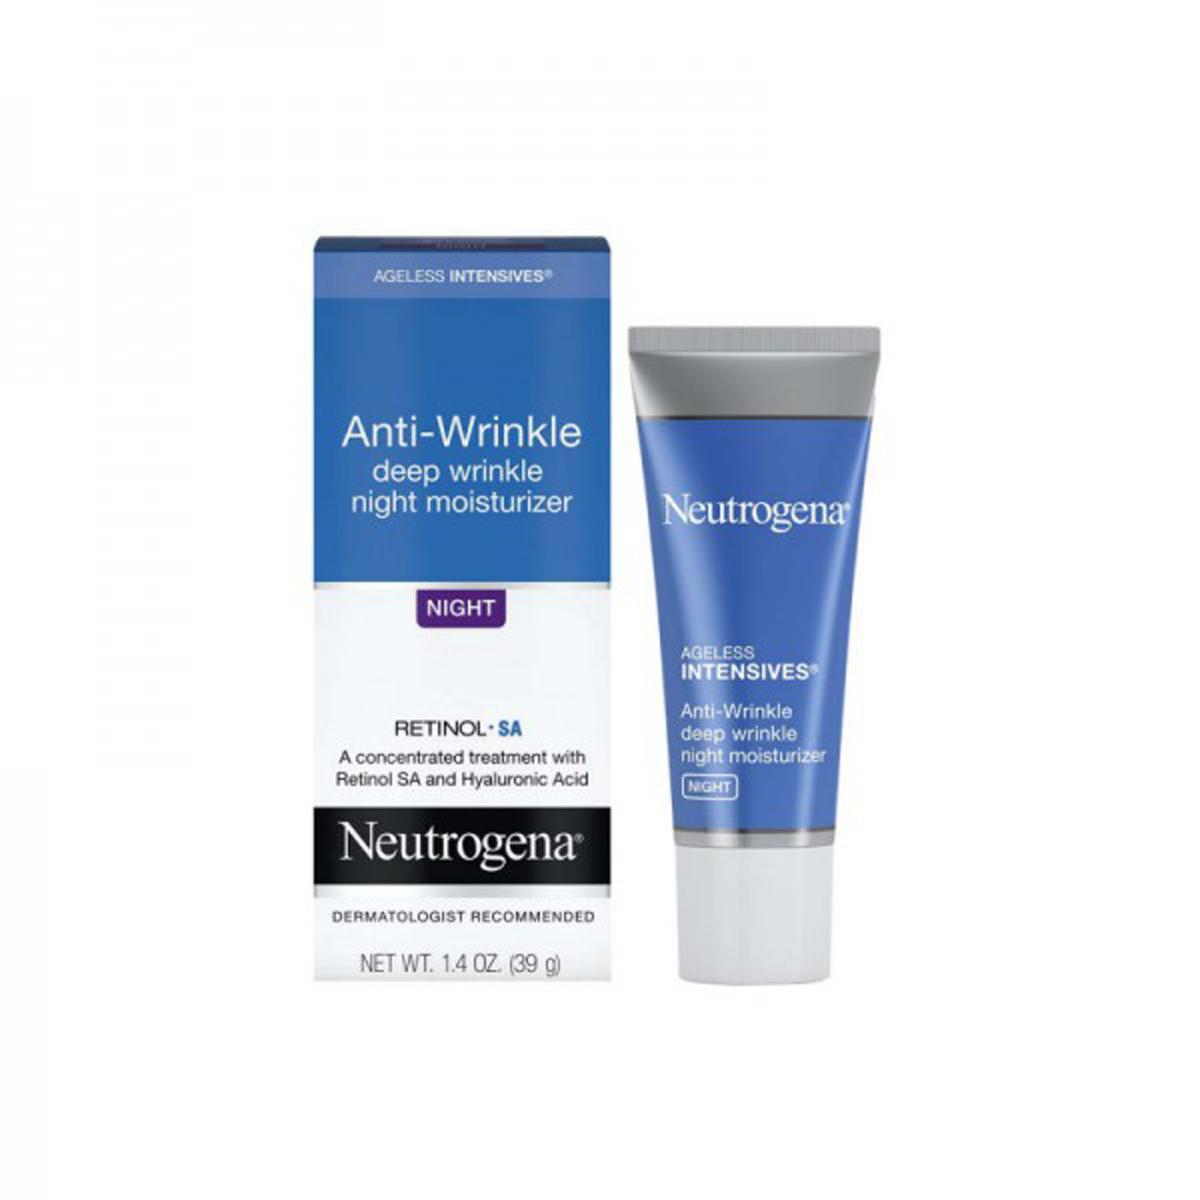 INTENSIVES ANTI-WRINKLE NIGHT MOISTURIZER - Delivery Pharmacy